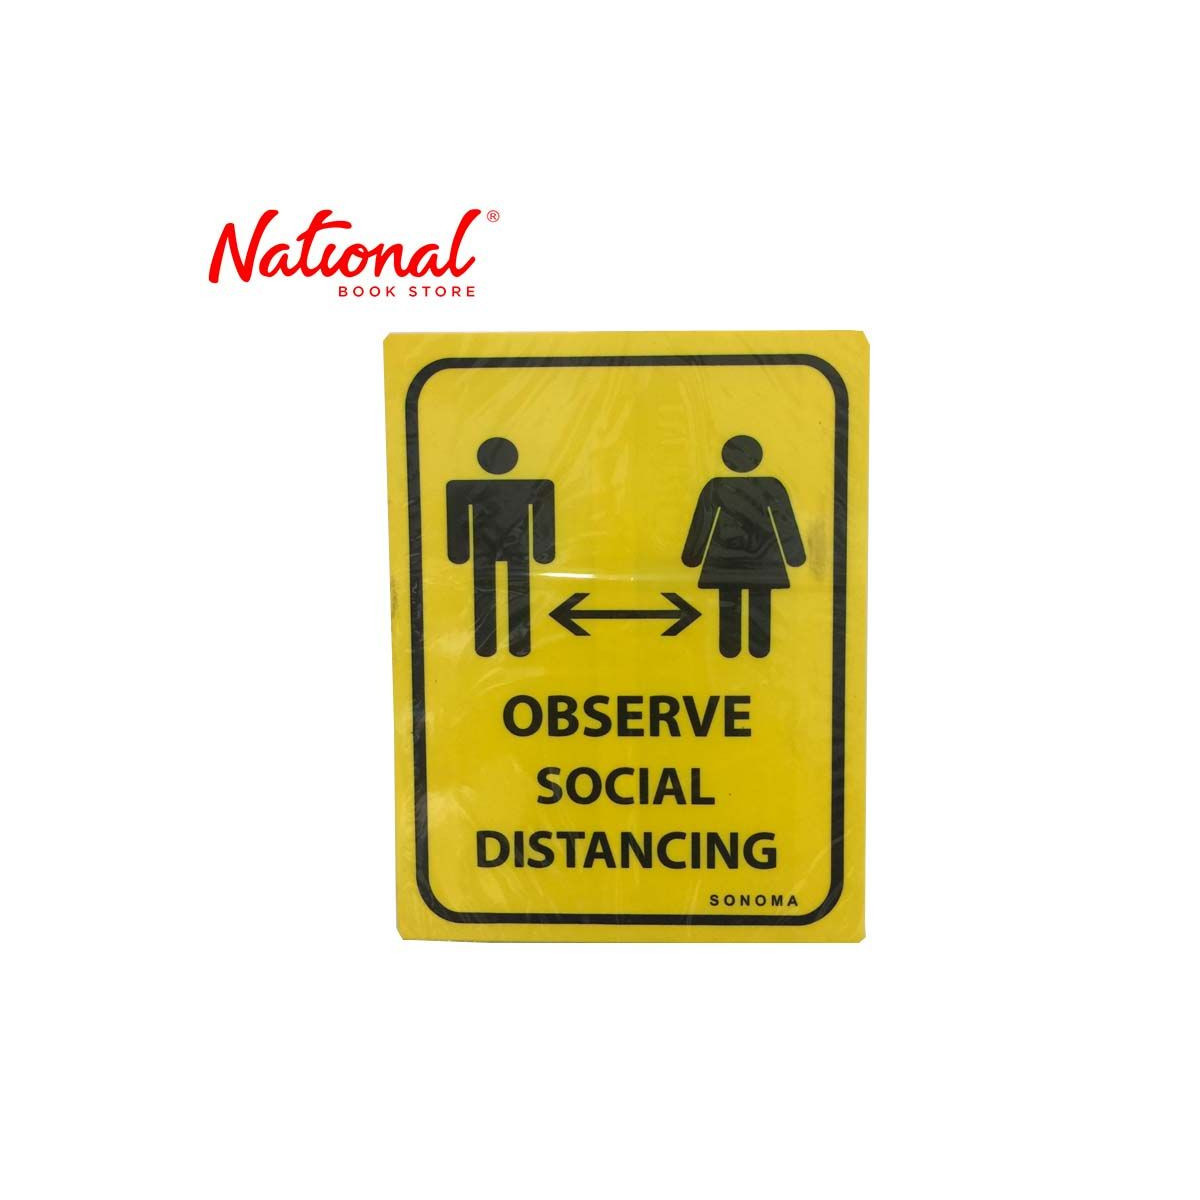 Sonoma Signage 8.5x11 inches Yellow Observe Social Distancing - Office Business Supplies